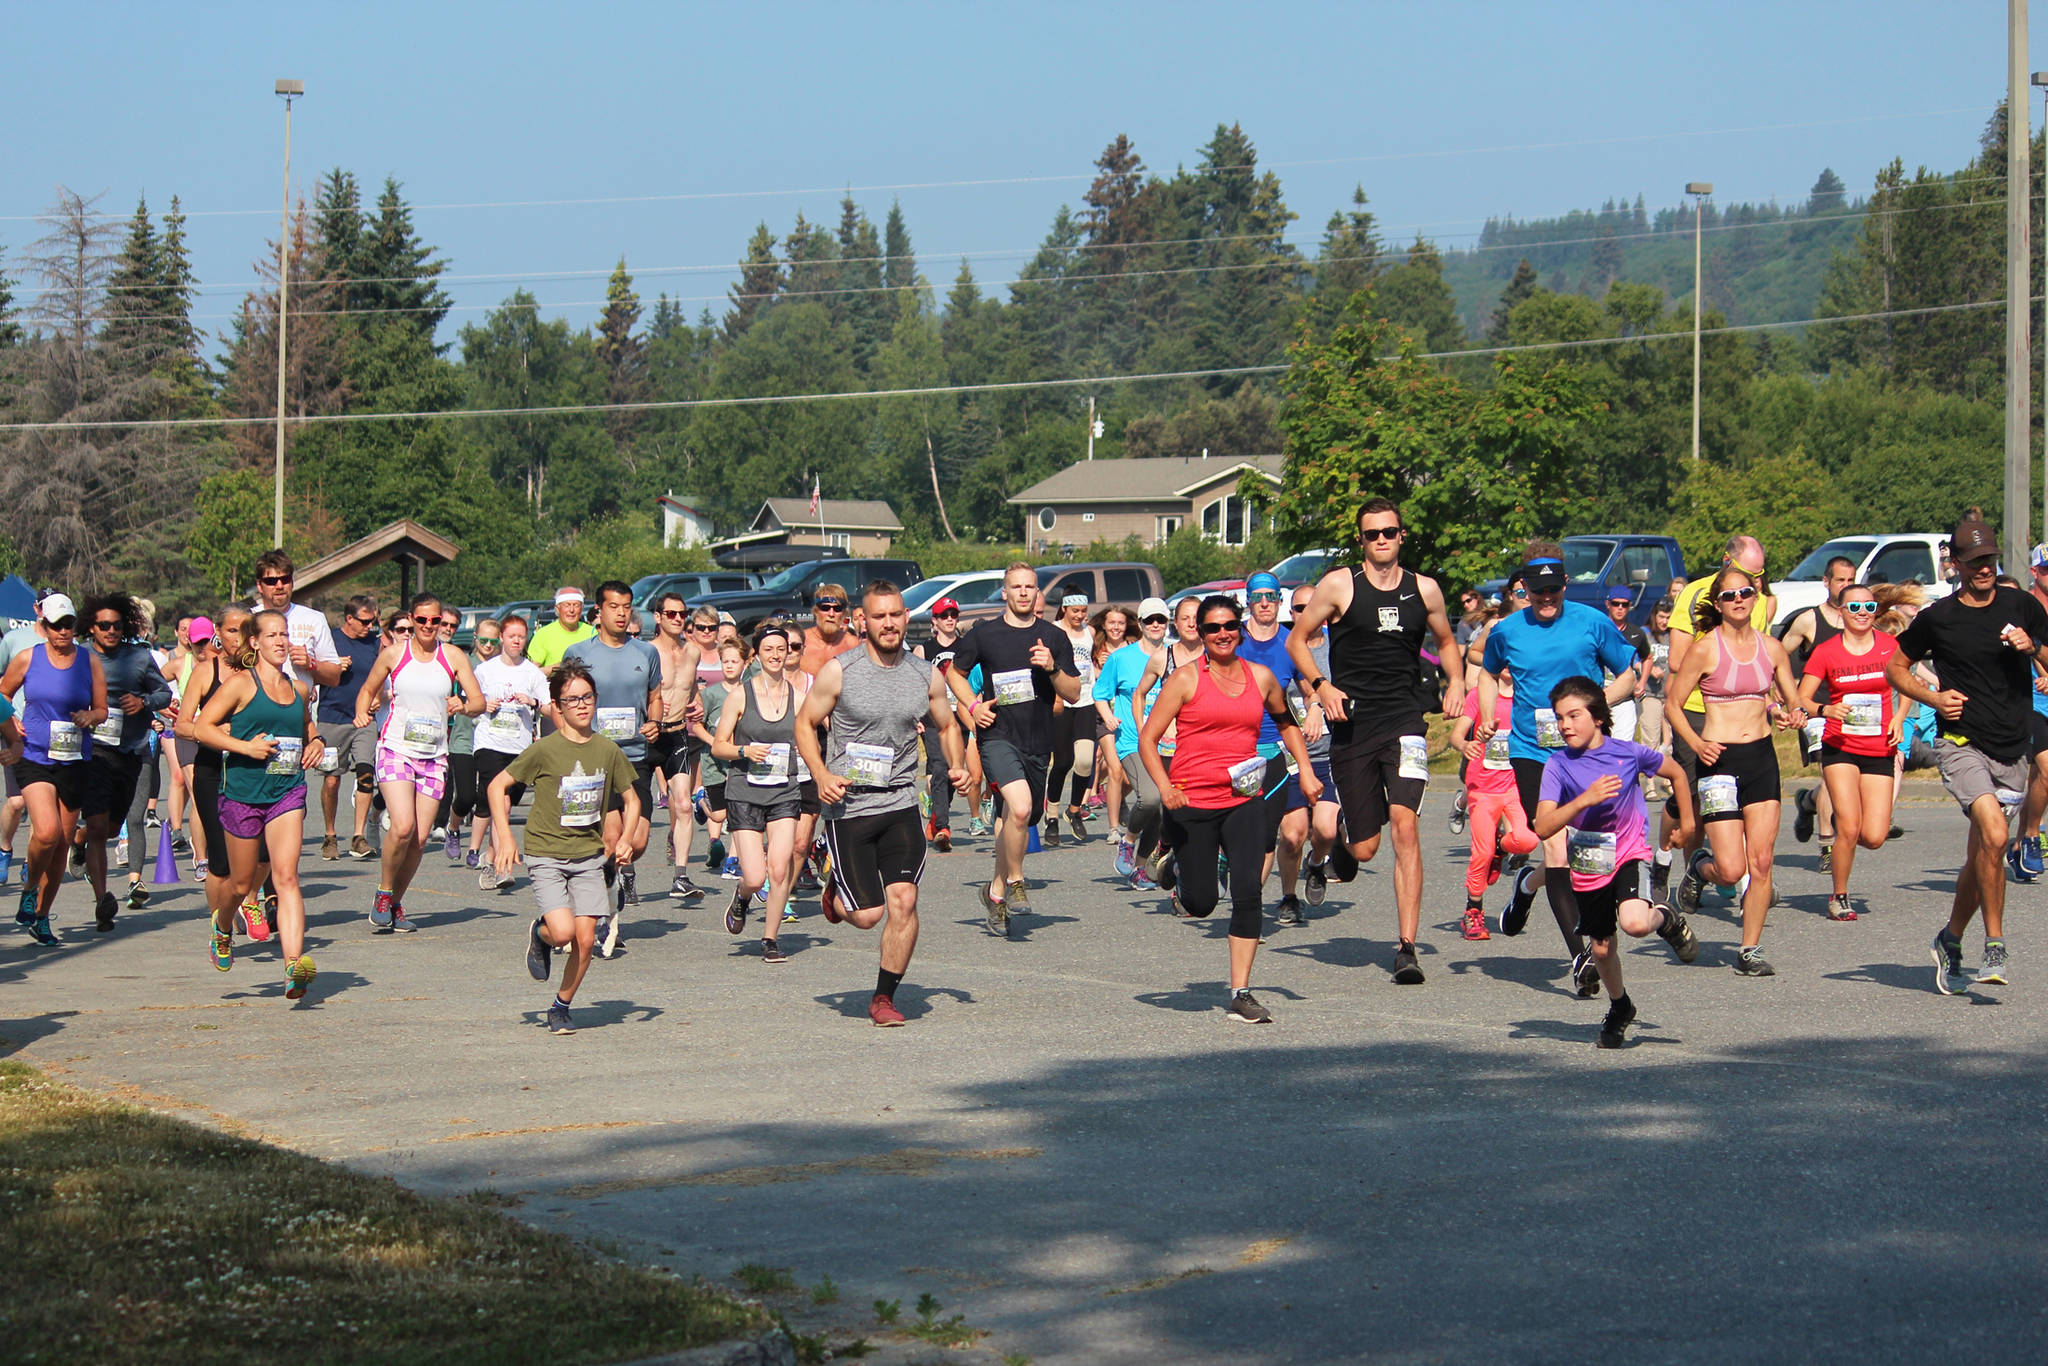 Participants in the 2019 Spit Run 10k to the Bay take off from the starting line at Homer High School on Saturday, June 29, 2019 in Homer, Alaska. (Photo by Megan Pacer/Homer News file)